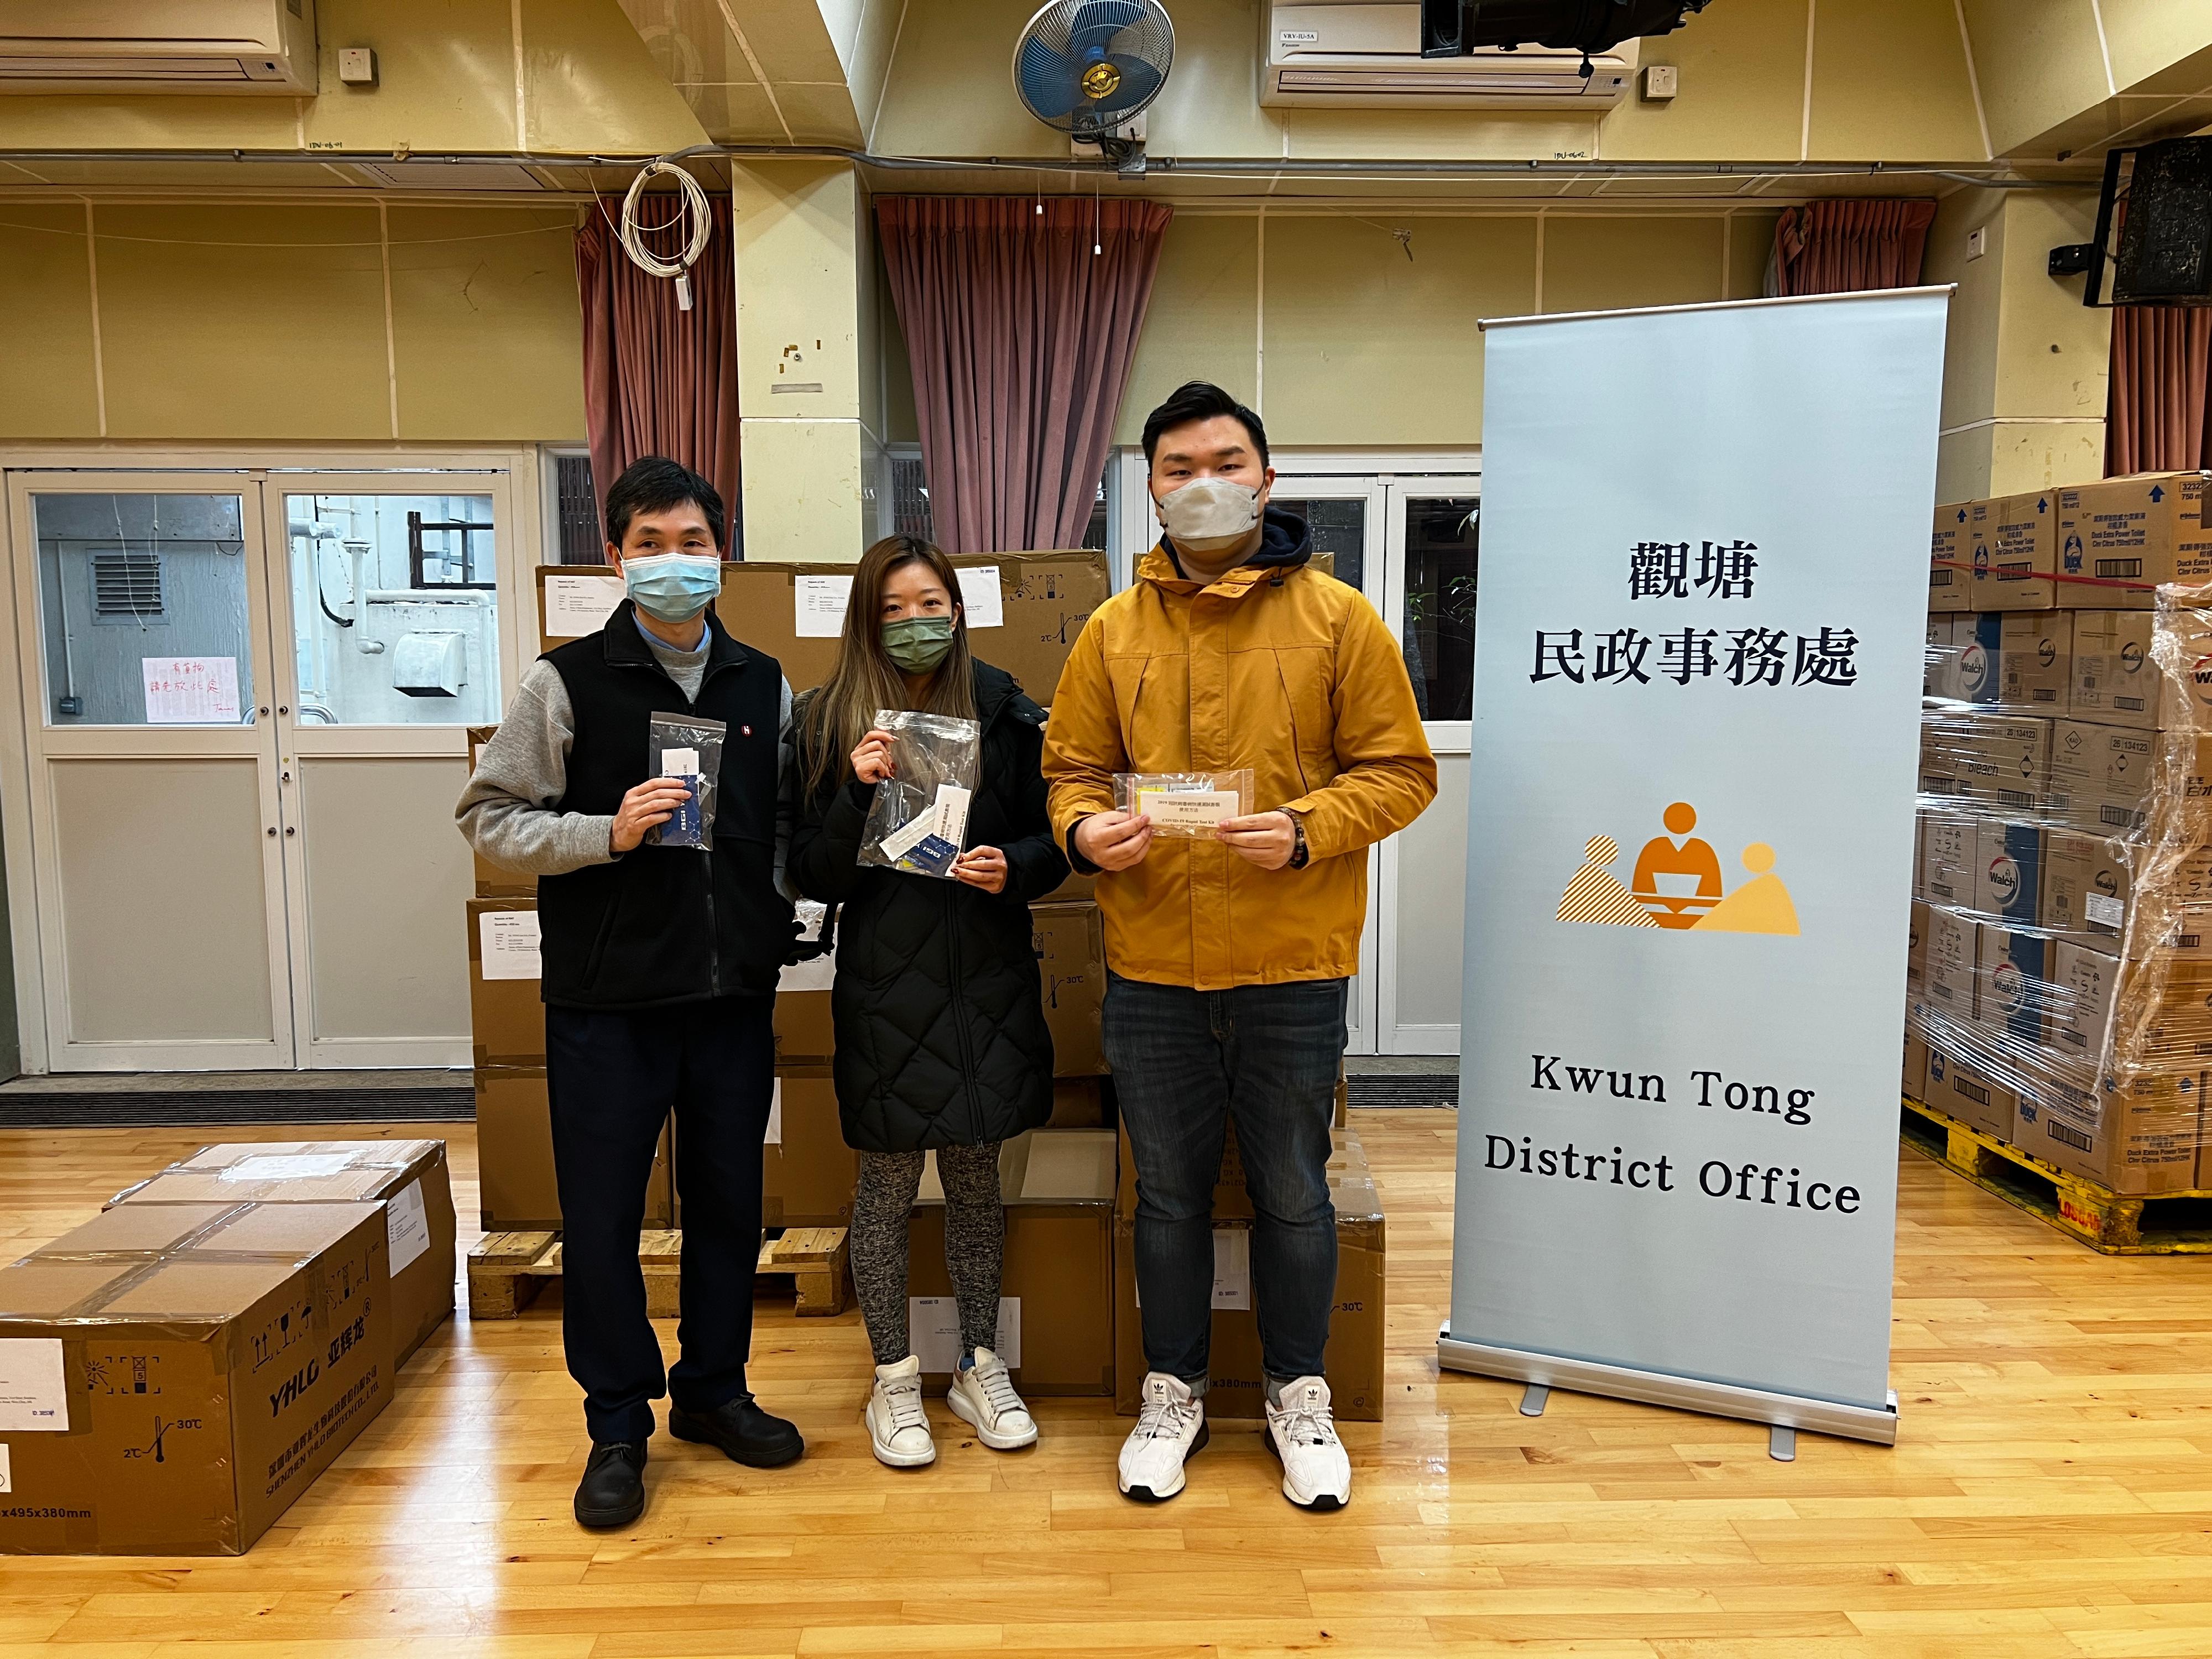 The Kwun Tong District Office today (February 22) distributed rapid test kits to households, cleansing workers and property management staff living and working in Kwun Tong Garden Estate for voluntary testing through the Estate's property management company. 